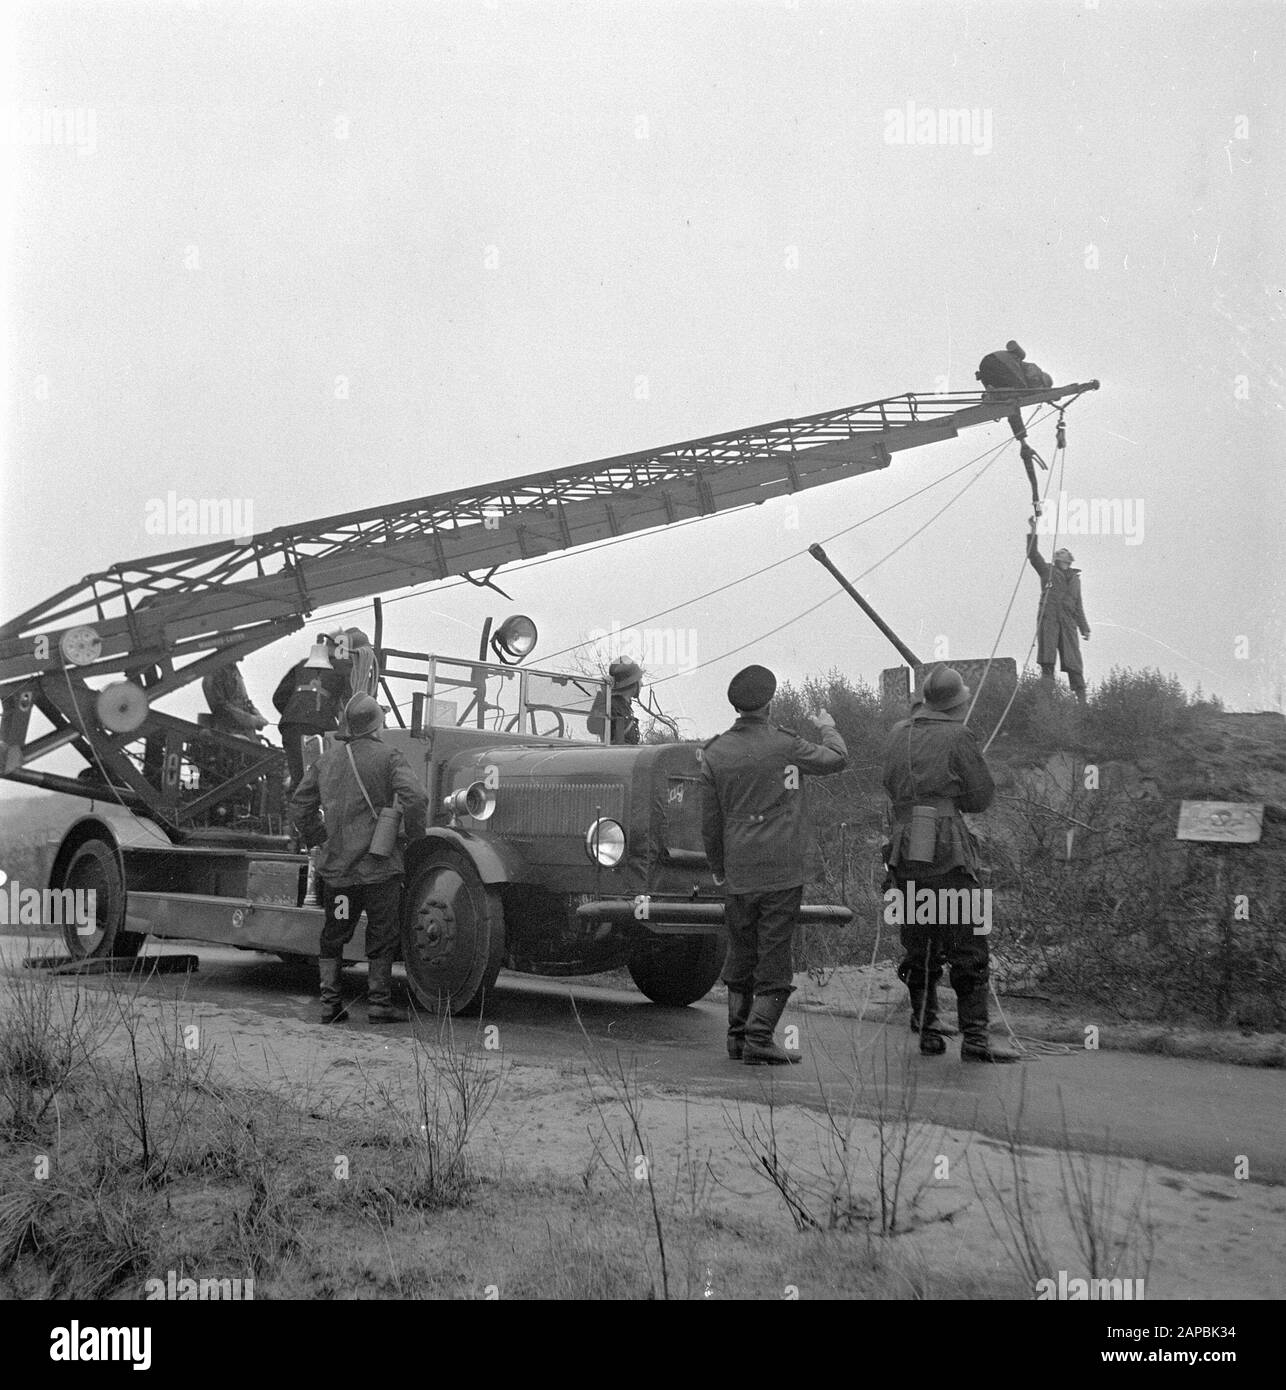 The Hague police and fire department rescue a boy from a former German bunker in a minefield. He was rescued with the help of the Magirus car ladder of the Hague Fire Department Date: 24 December 1945 Location: The Hague, Zuid-Holland Keywords: fire brigade, explosives, children, police, rescue personname: Magirus Stock Photo